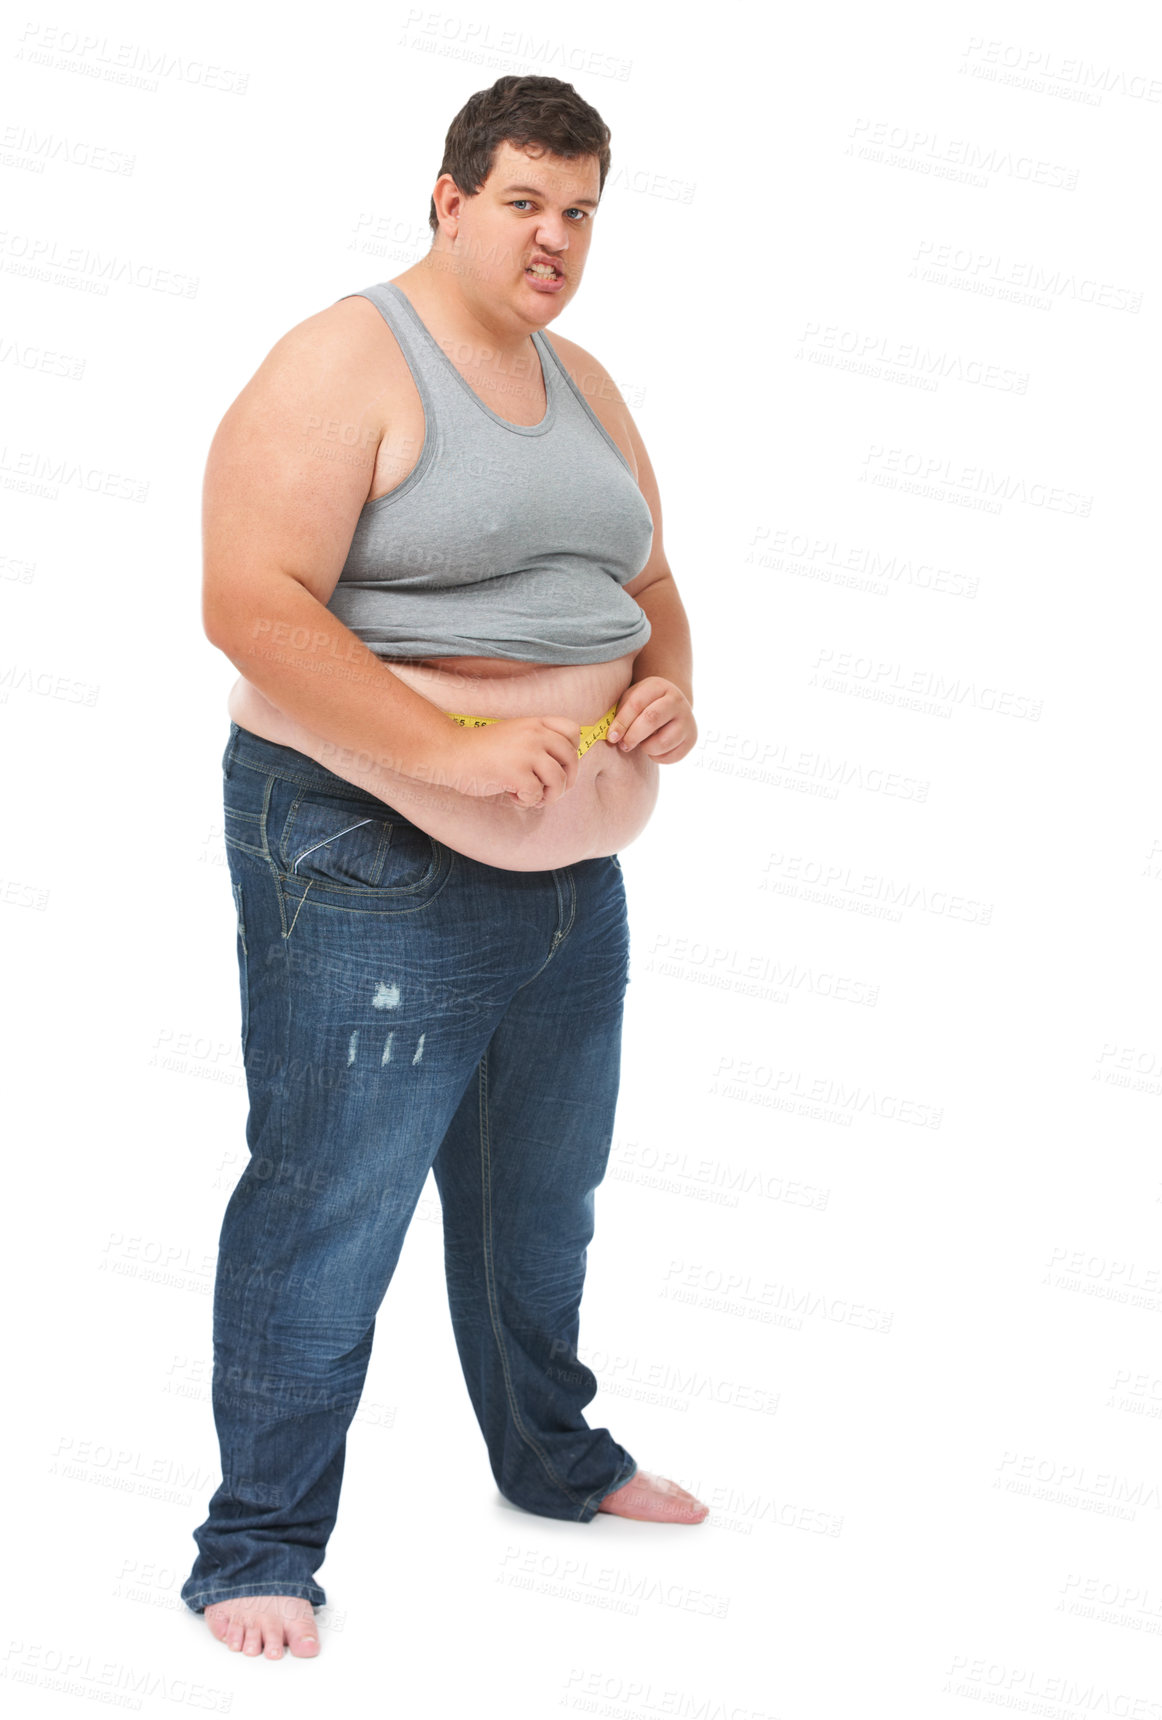 Buy stock photo Obesity, tape measure on abdomen and portrait of angry man checking size, body health and isolated on white background. Frustrated male, measuring stomach and weight loss progress on studio backdrop.